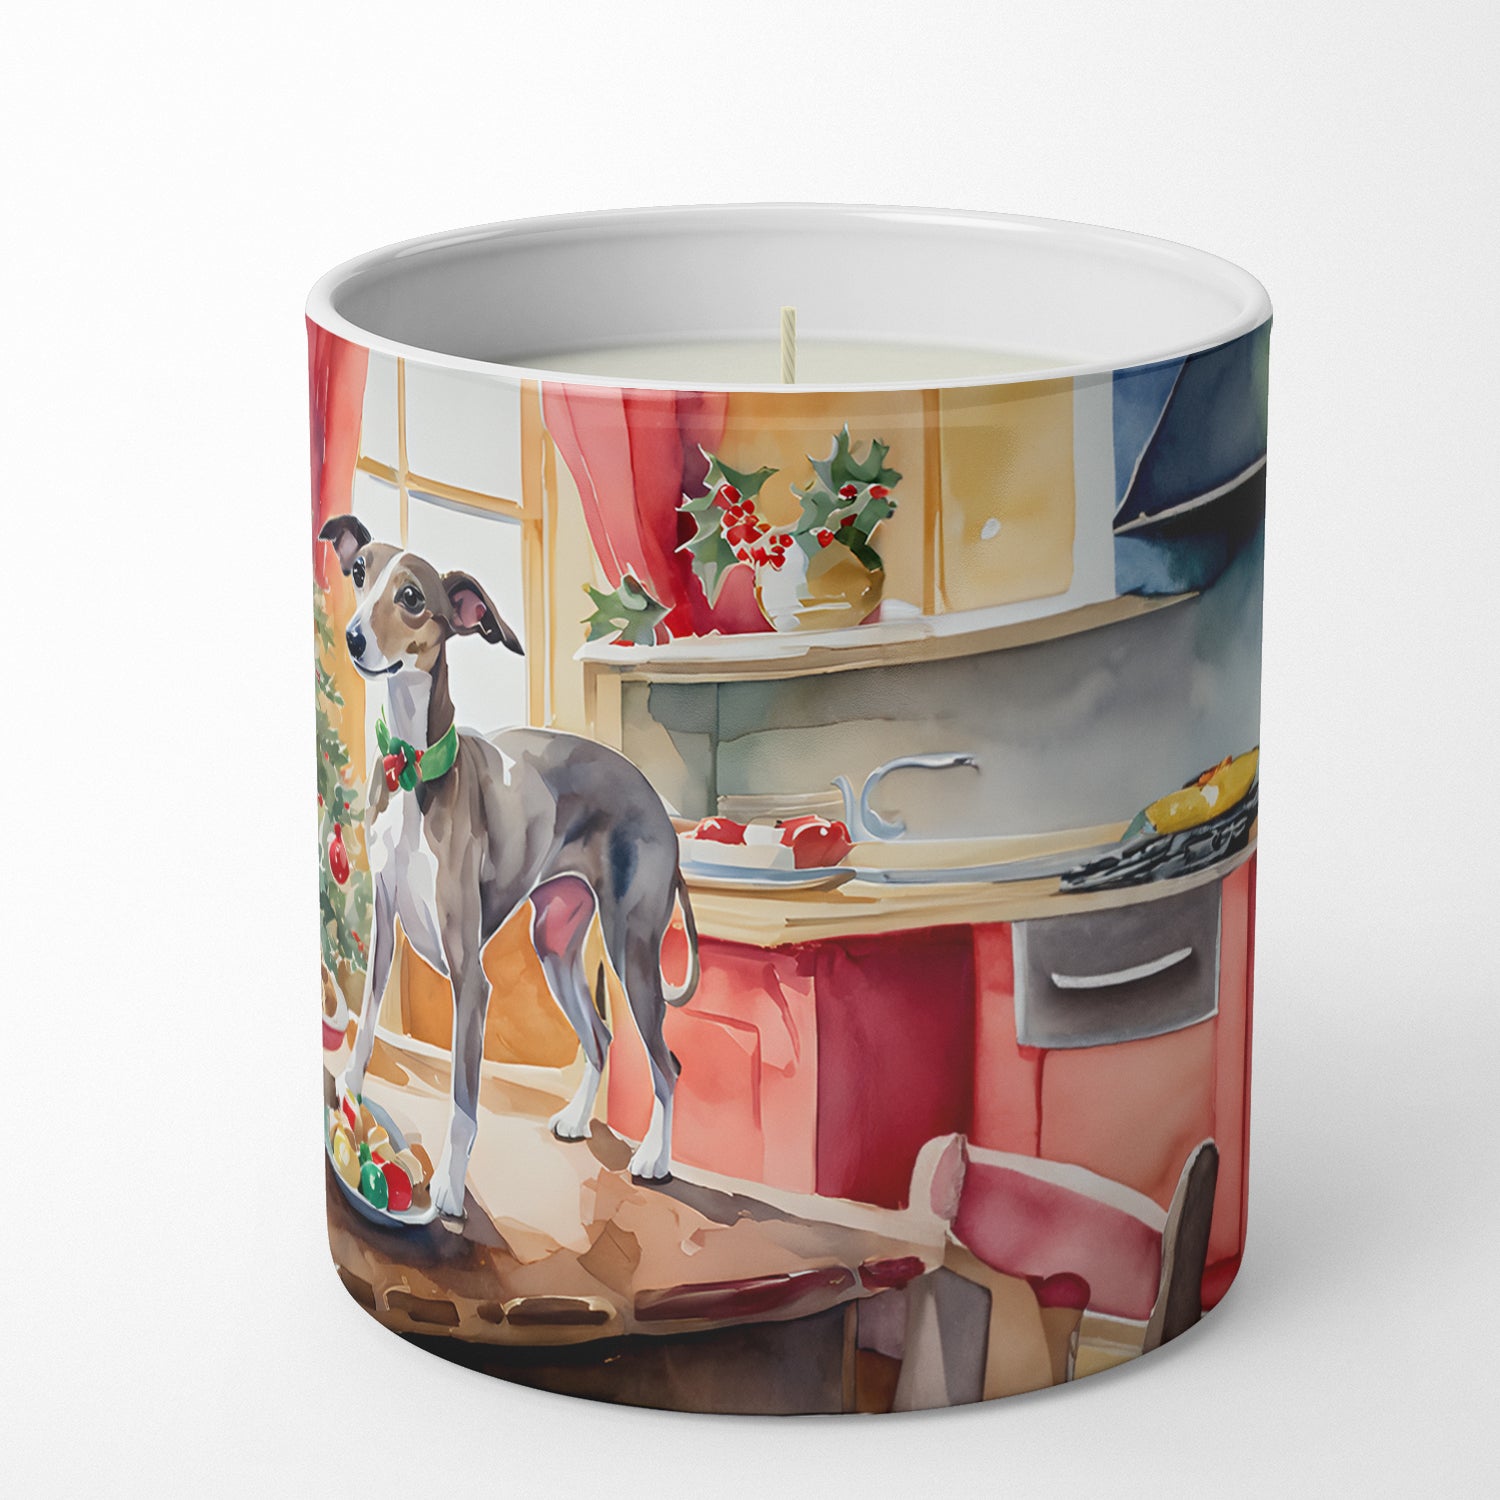 Italian Greyhound Christmas Cookies Decorative Soy Candle